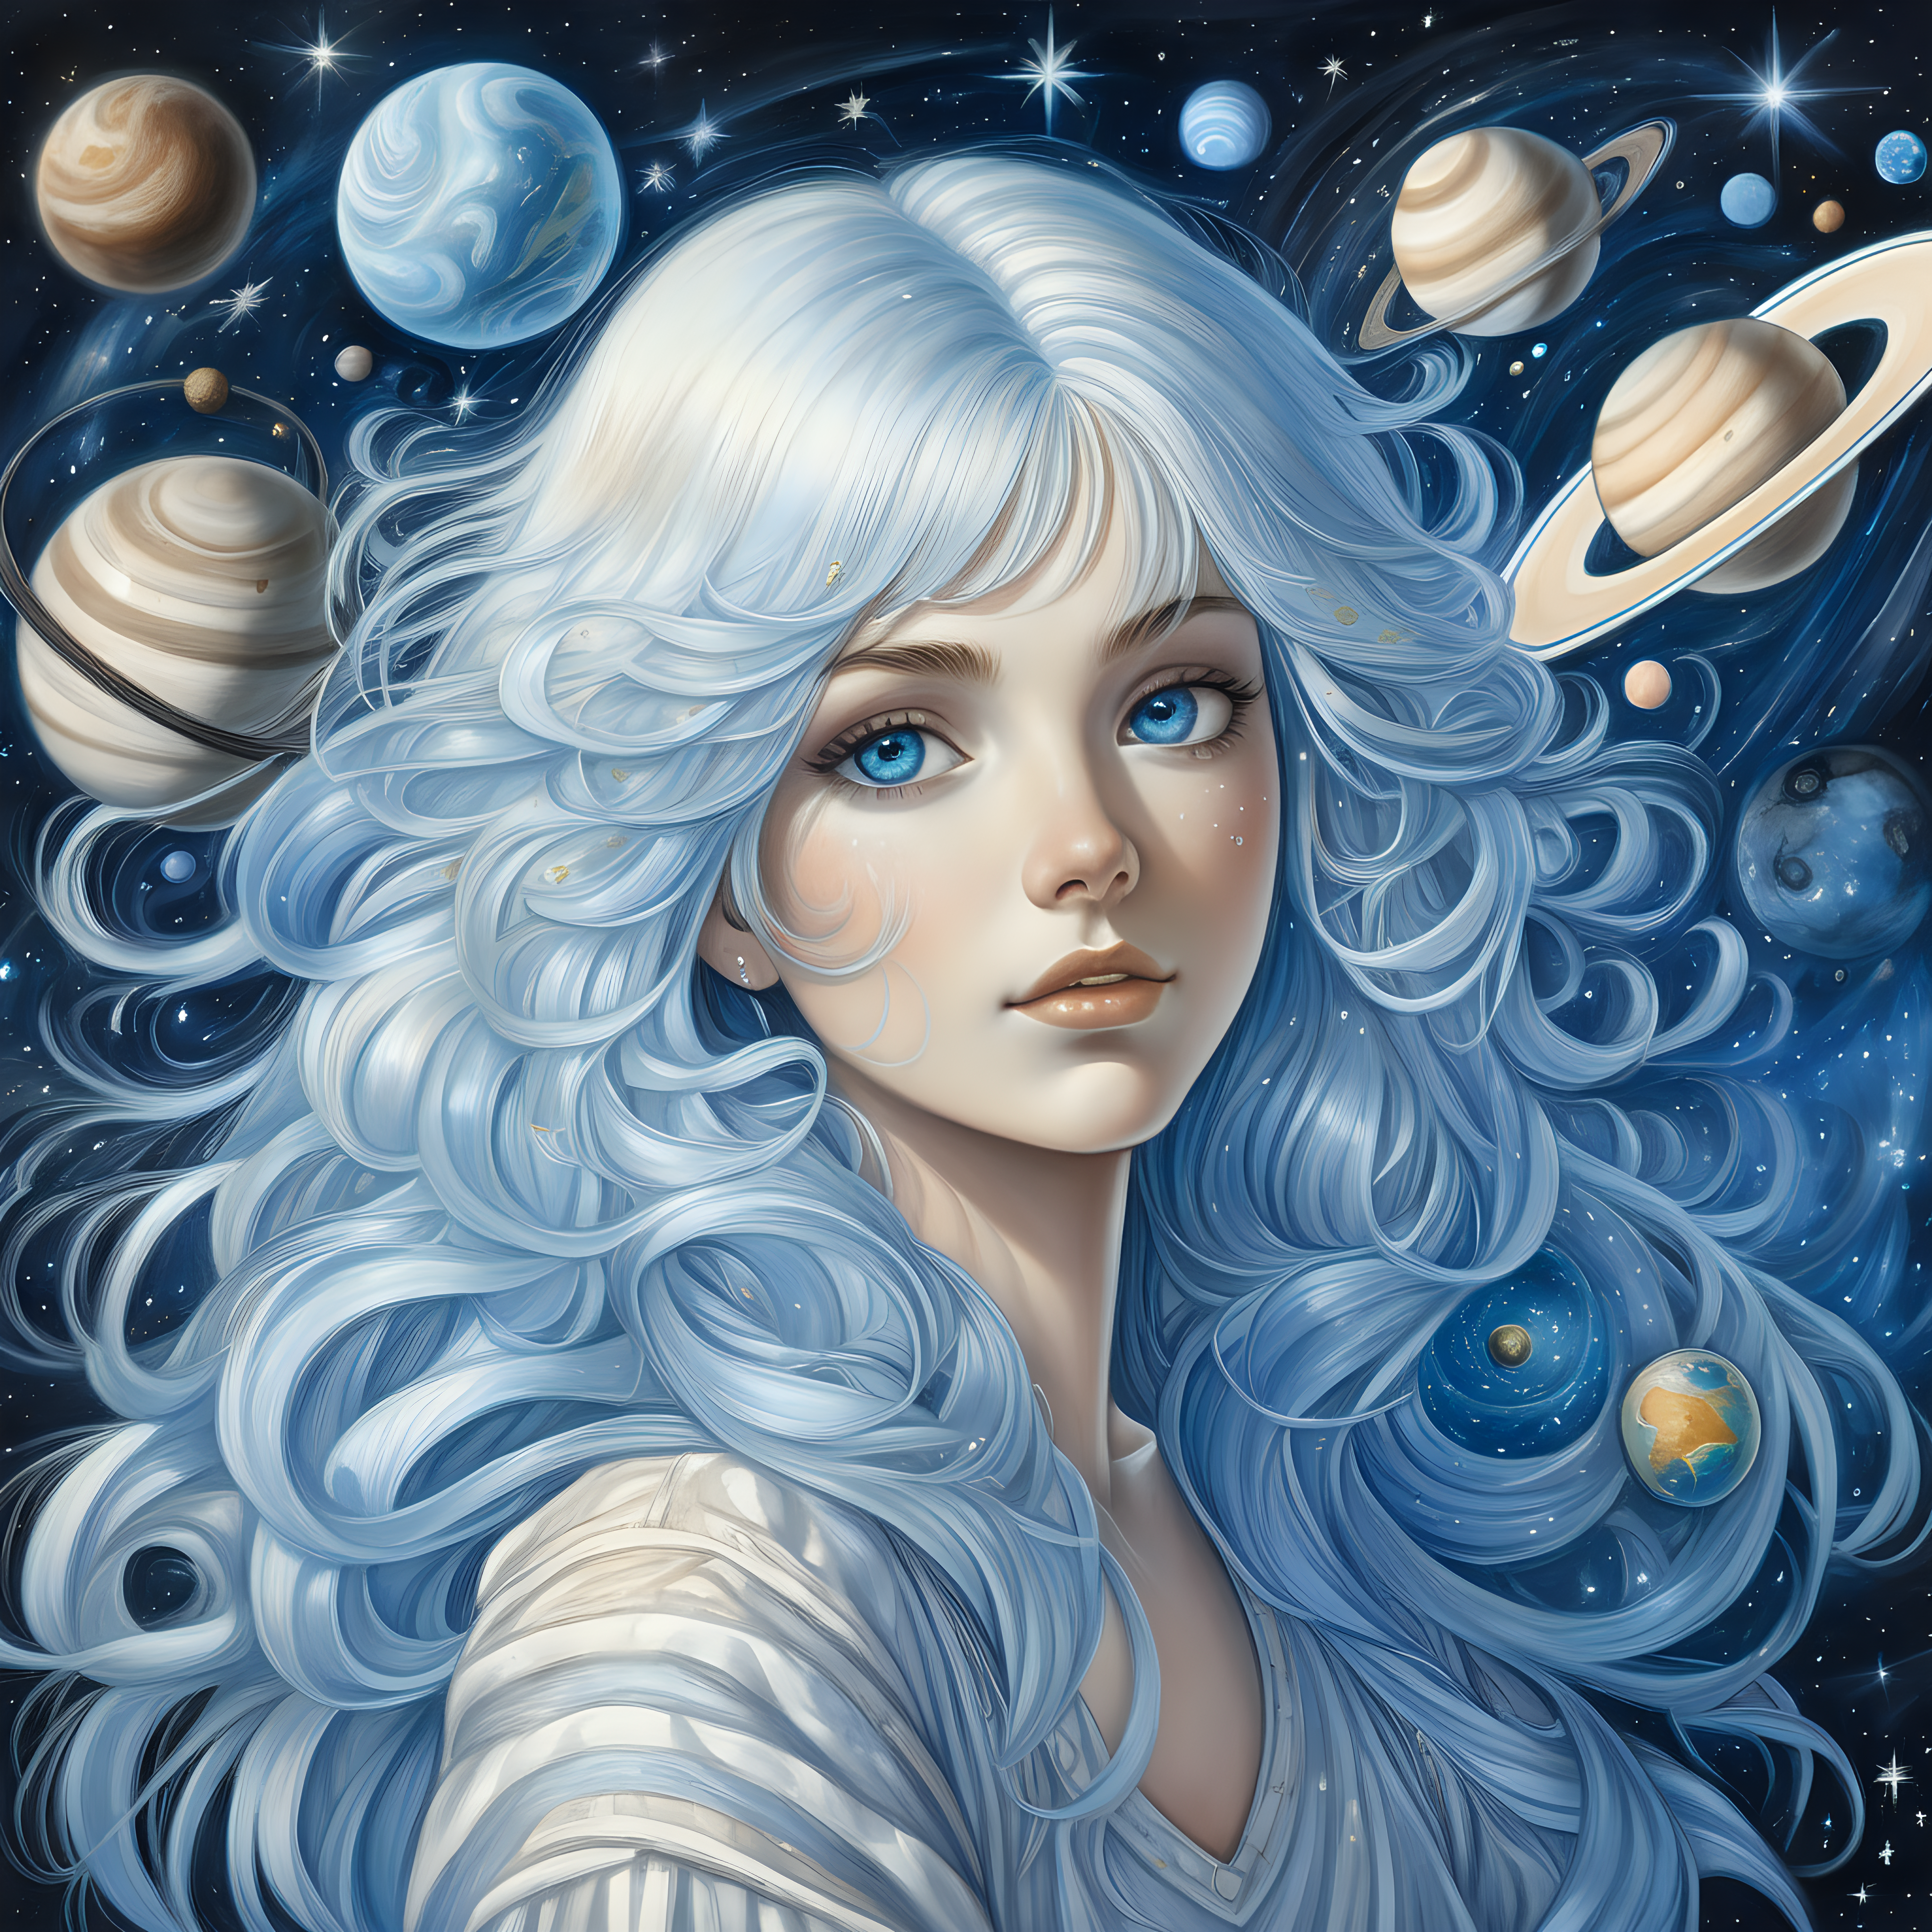 Celestial whote hair blue eyed lady on a